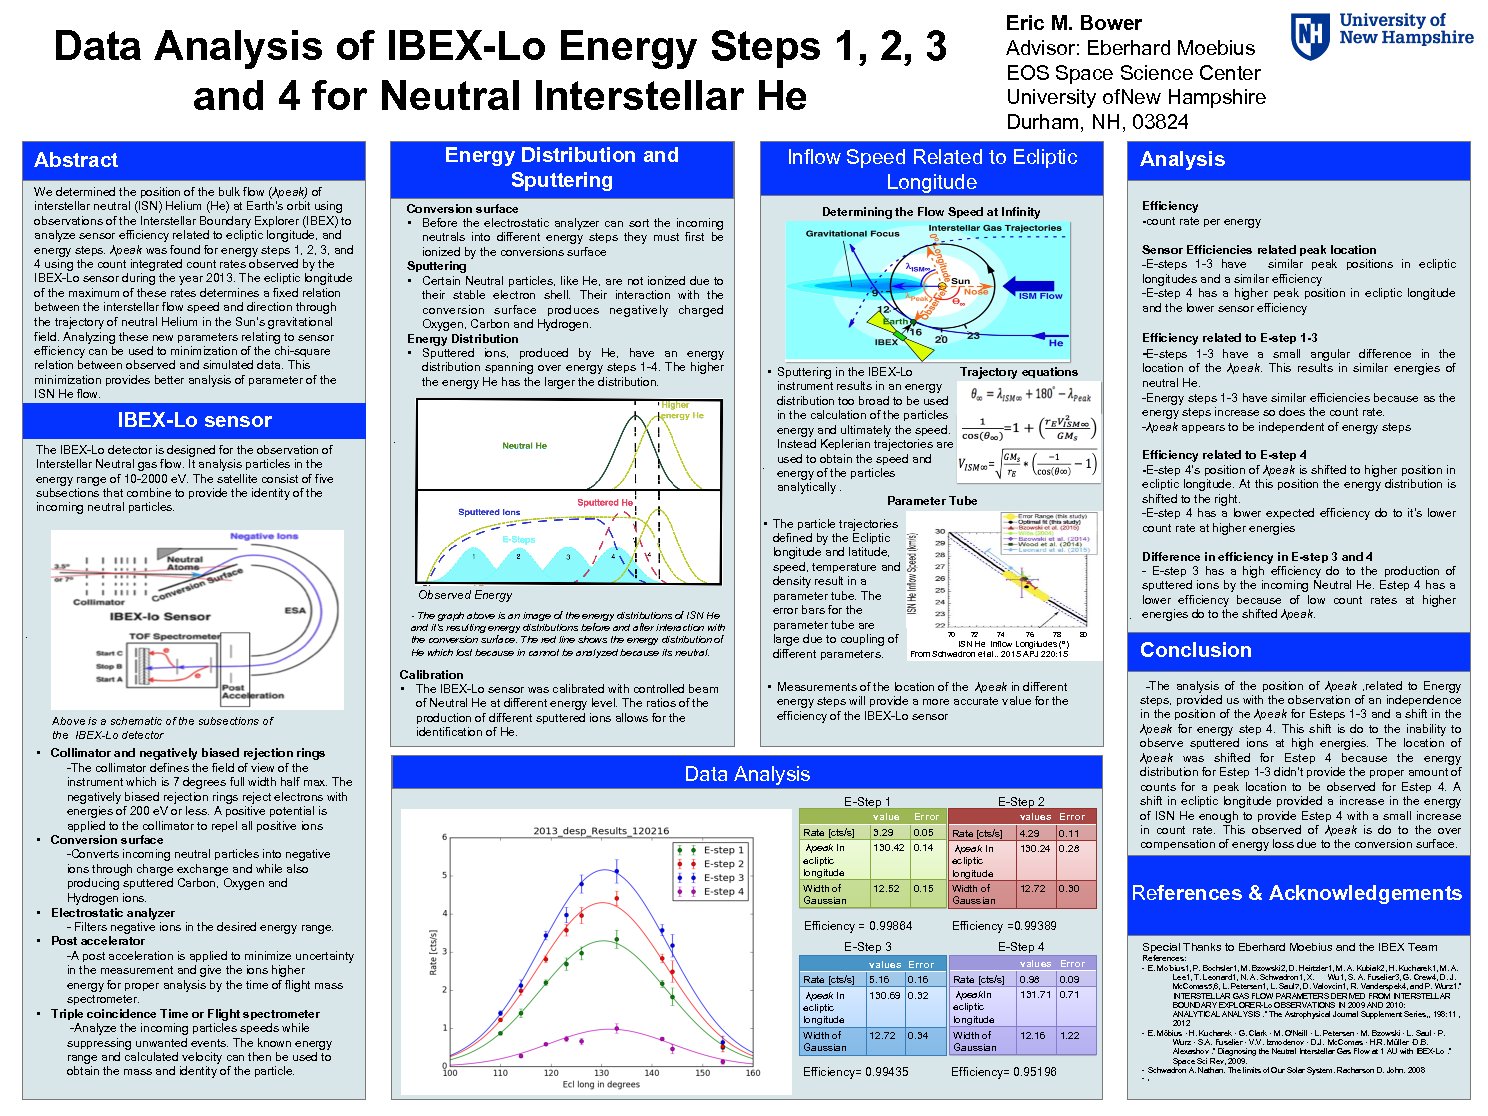 Data Analysis Of Ibex-Lo Energy Steps 1, 2, 3 And 4 For Neutral Interstellar He by emb12